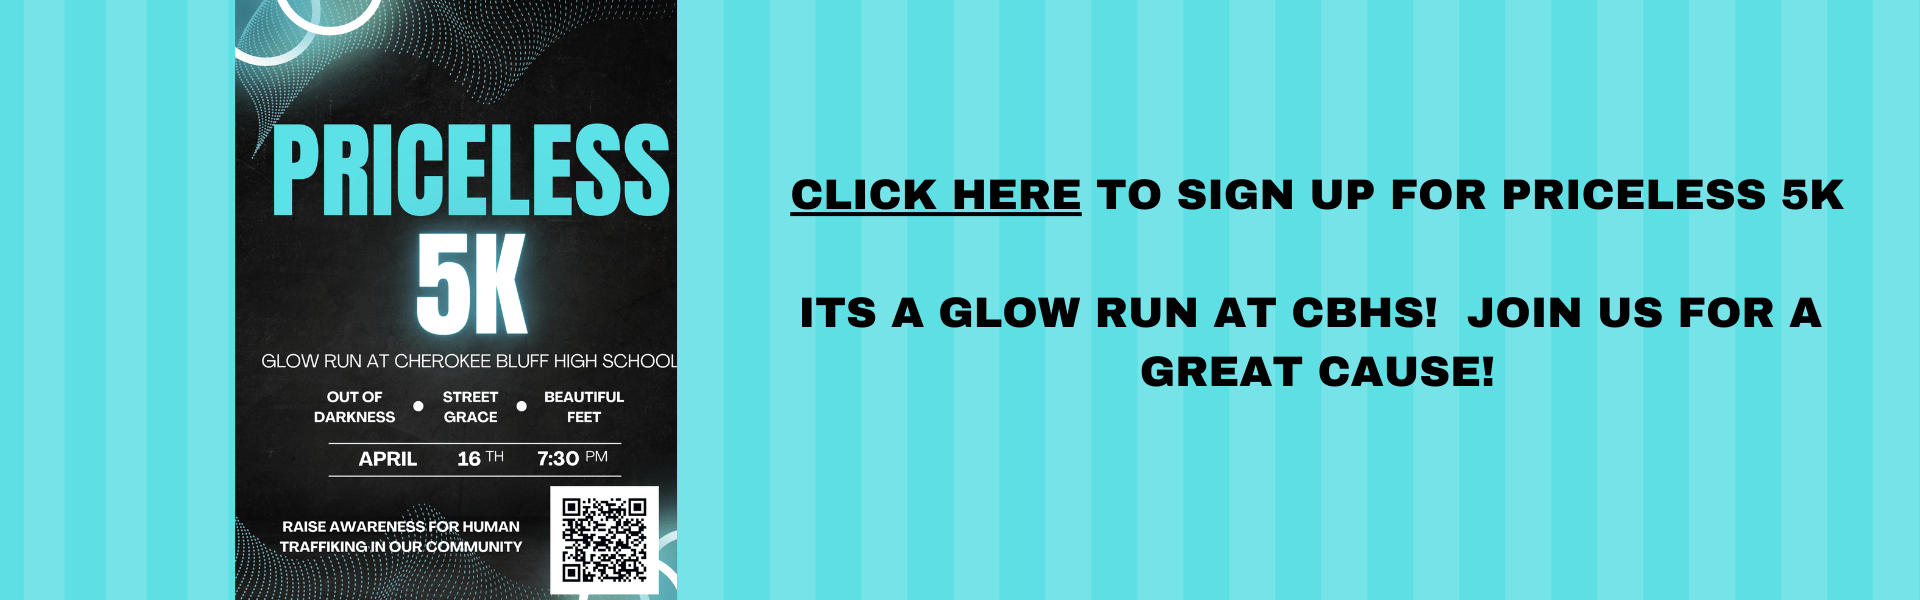 CLICK HERE TO SIGN UP FOR PRICELESS 5K ITS A GLOW RUN AT CBHS! JOIN US FOR A GREAT CAUSE! (1)